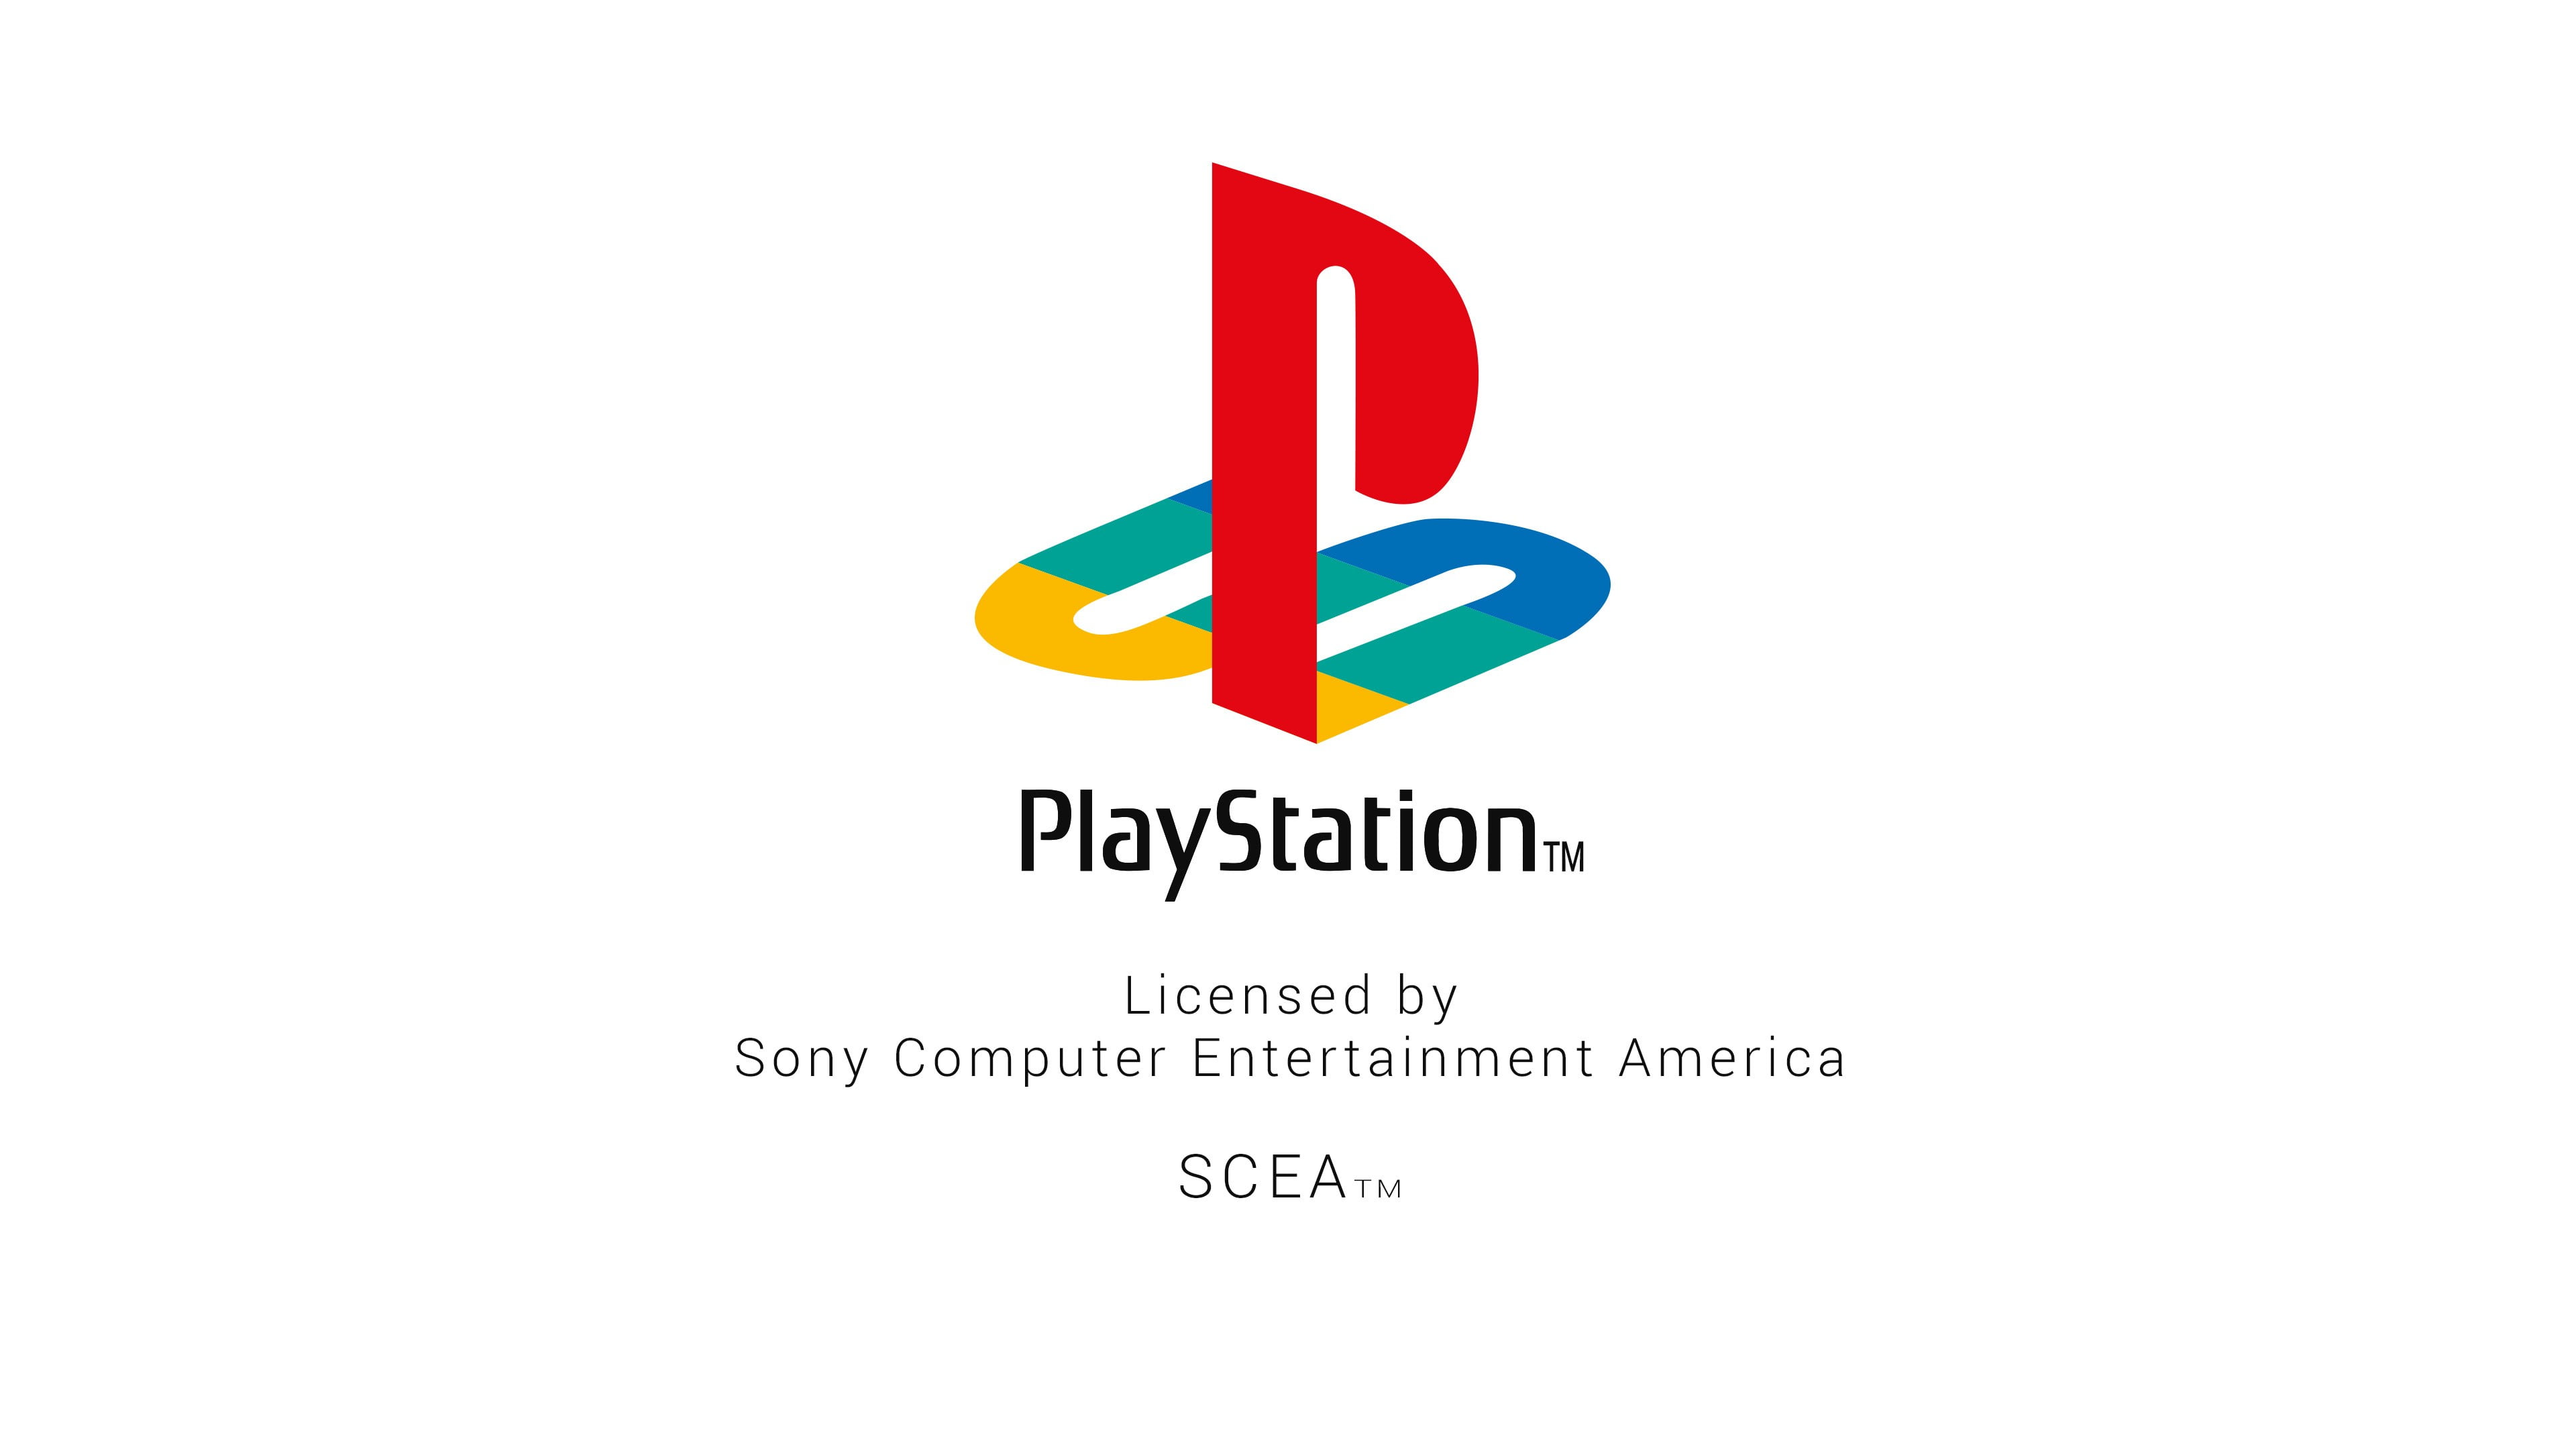 Playstation 4 Logo Wallpapers Copy by tygun on DeviantArt